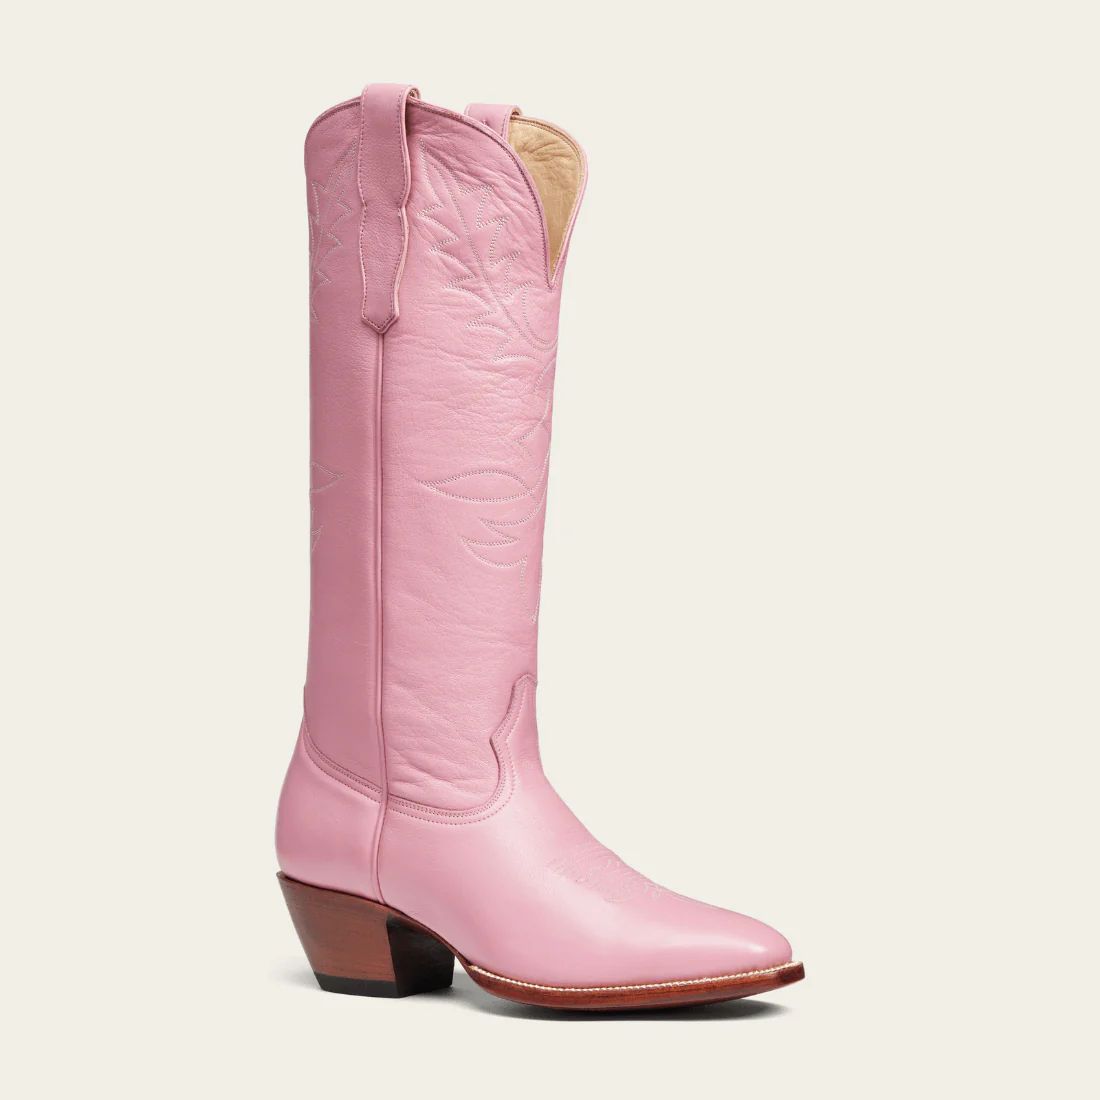 The Lover's Lane Boot | CITY Boots